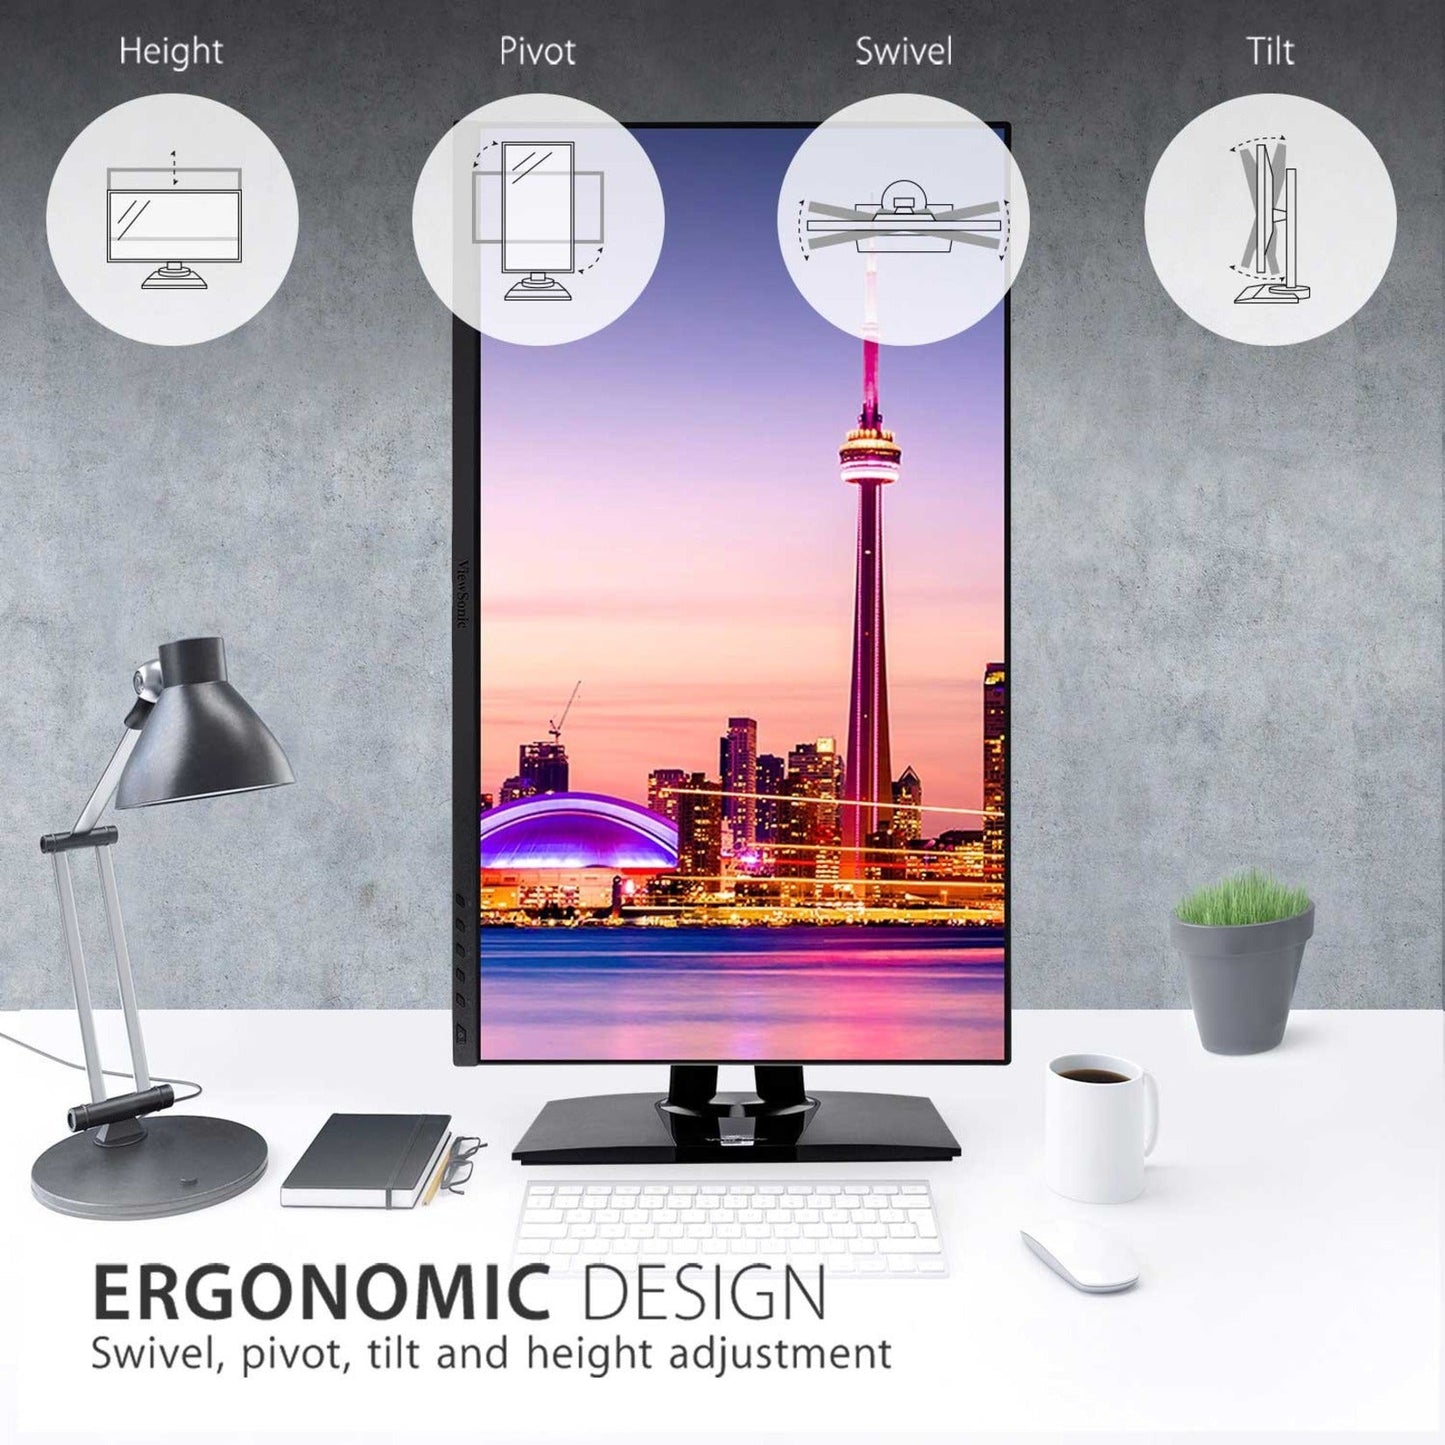 ViewSonic VP2756-2K 27 Inch Premium IPS 1440p Ergonomic Monitor with Ultra-Thin Bezels Color Accuracy Pantone Validated HDMI DisplayPort and USB C for Professional Home and Office